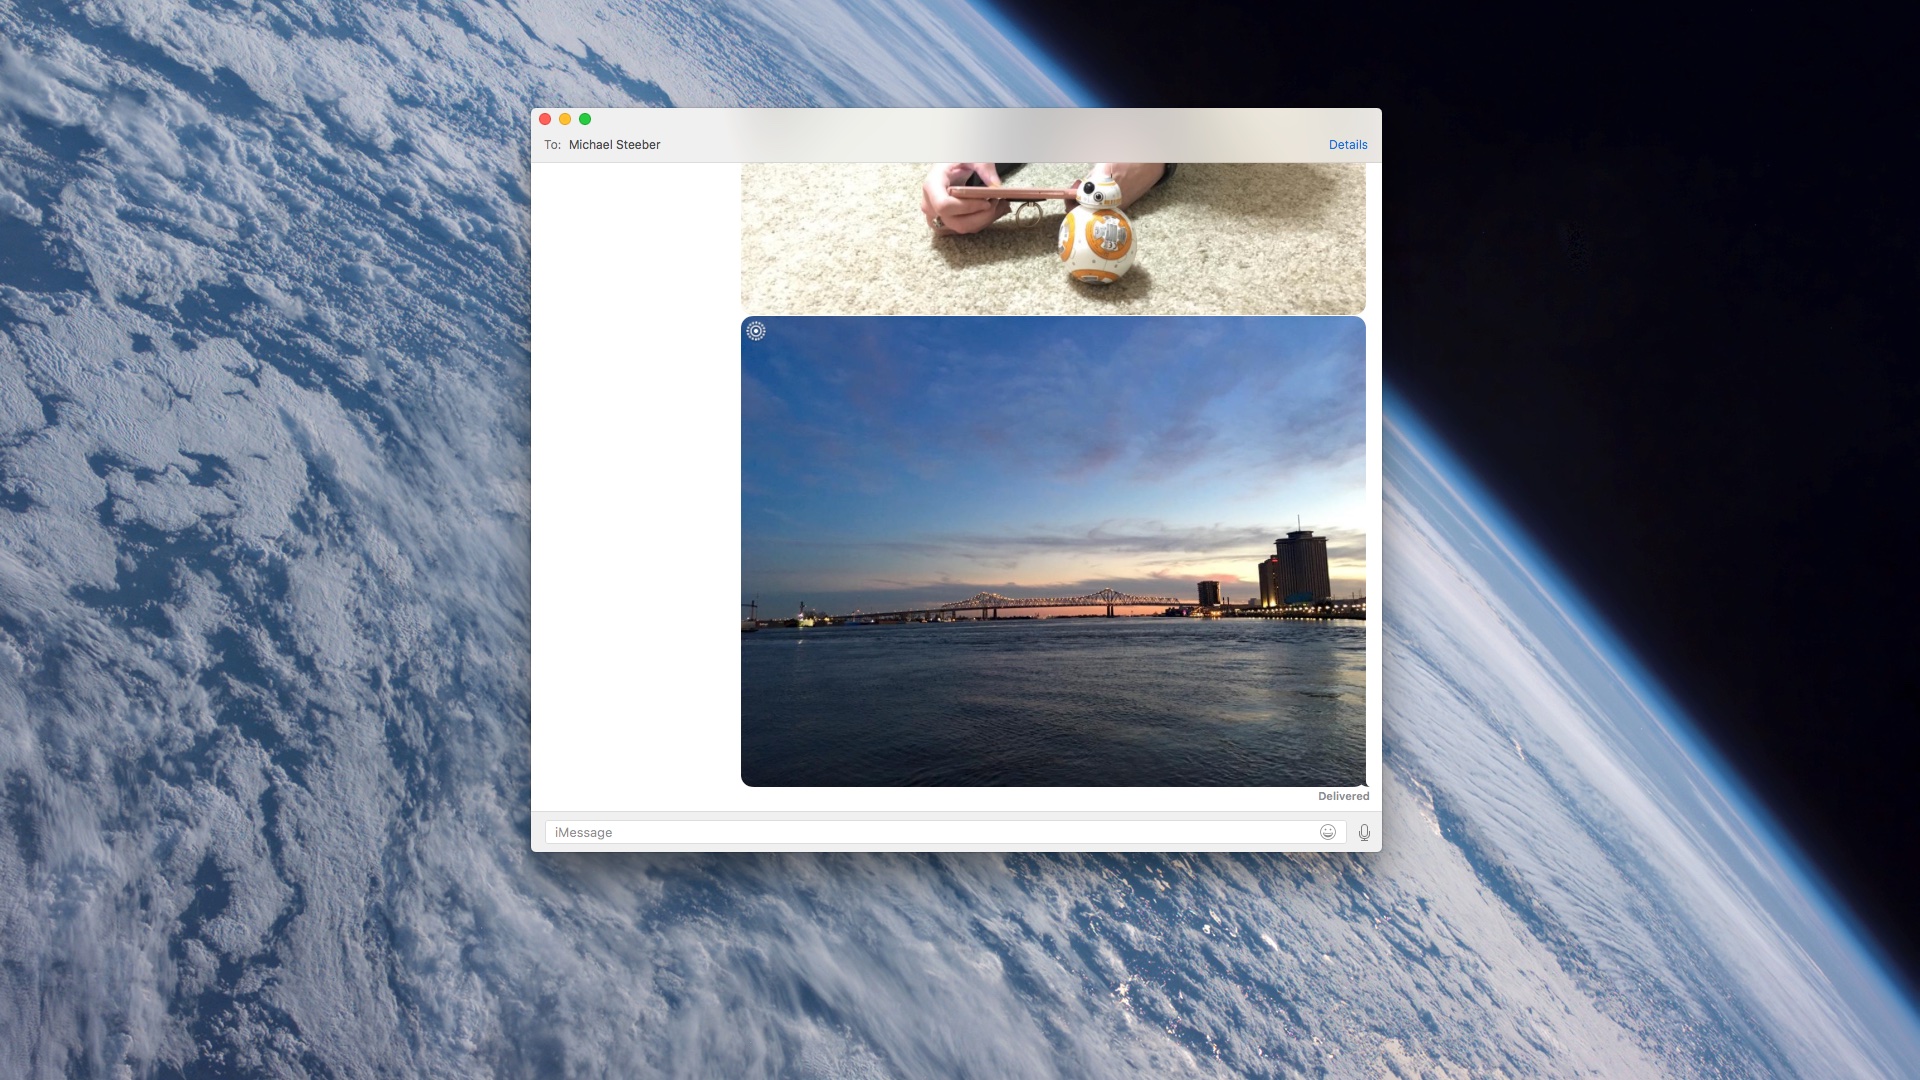 In OS X 10.11.4 we will finally be able to view Live Photos through the Messages app